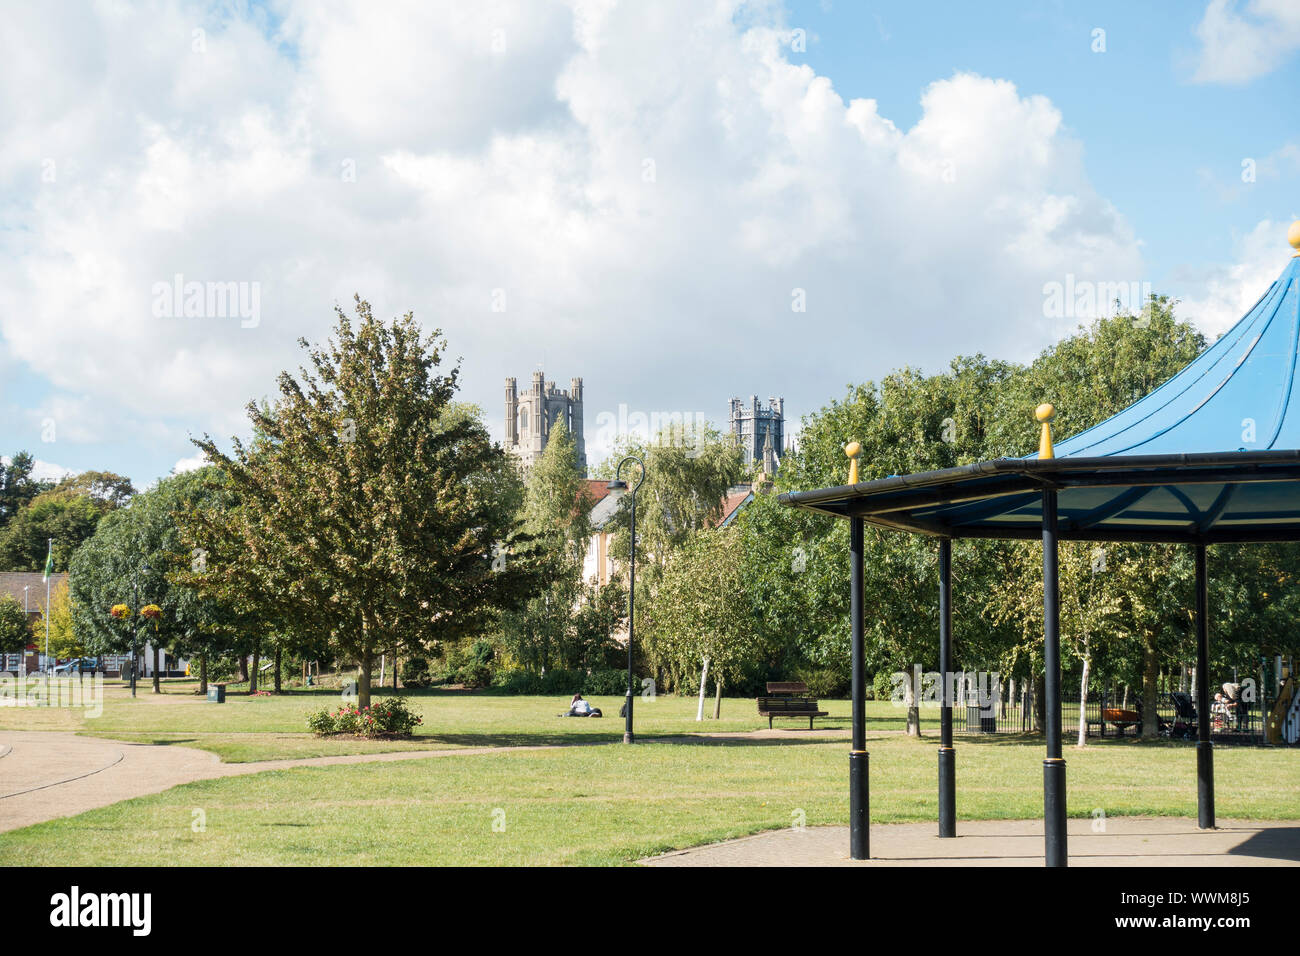 Ely cathedral from Jubilee Gardens Ely Cambridgeshire 2019 Stock Photo